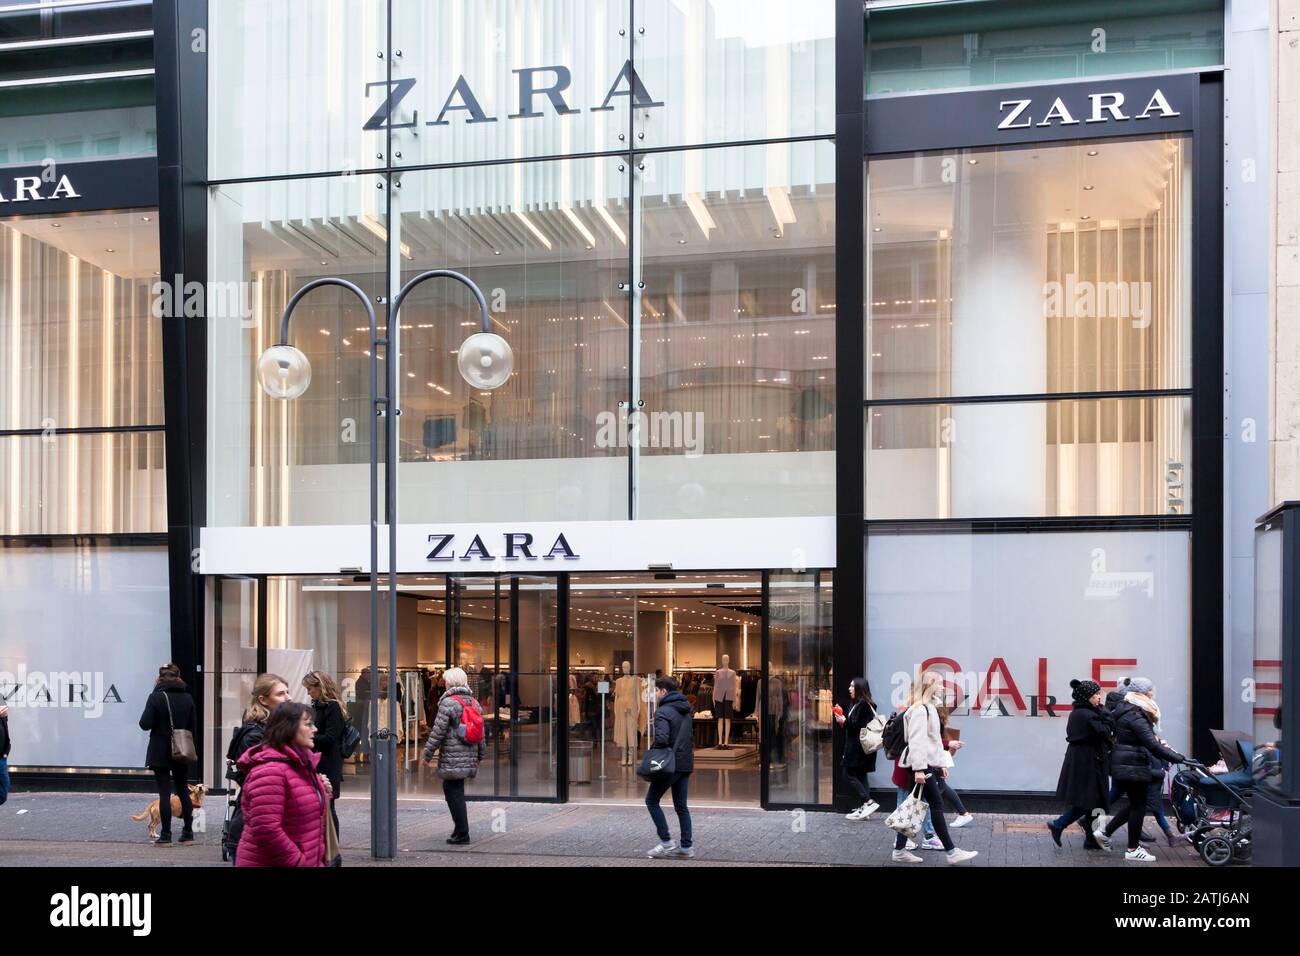 Zara Fashion Store High Resolution Stock Photography and Images - Alamy